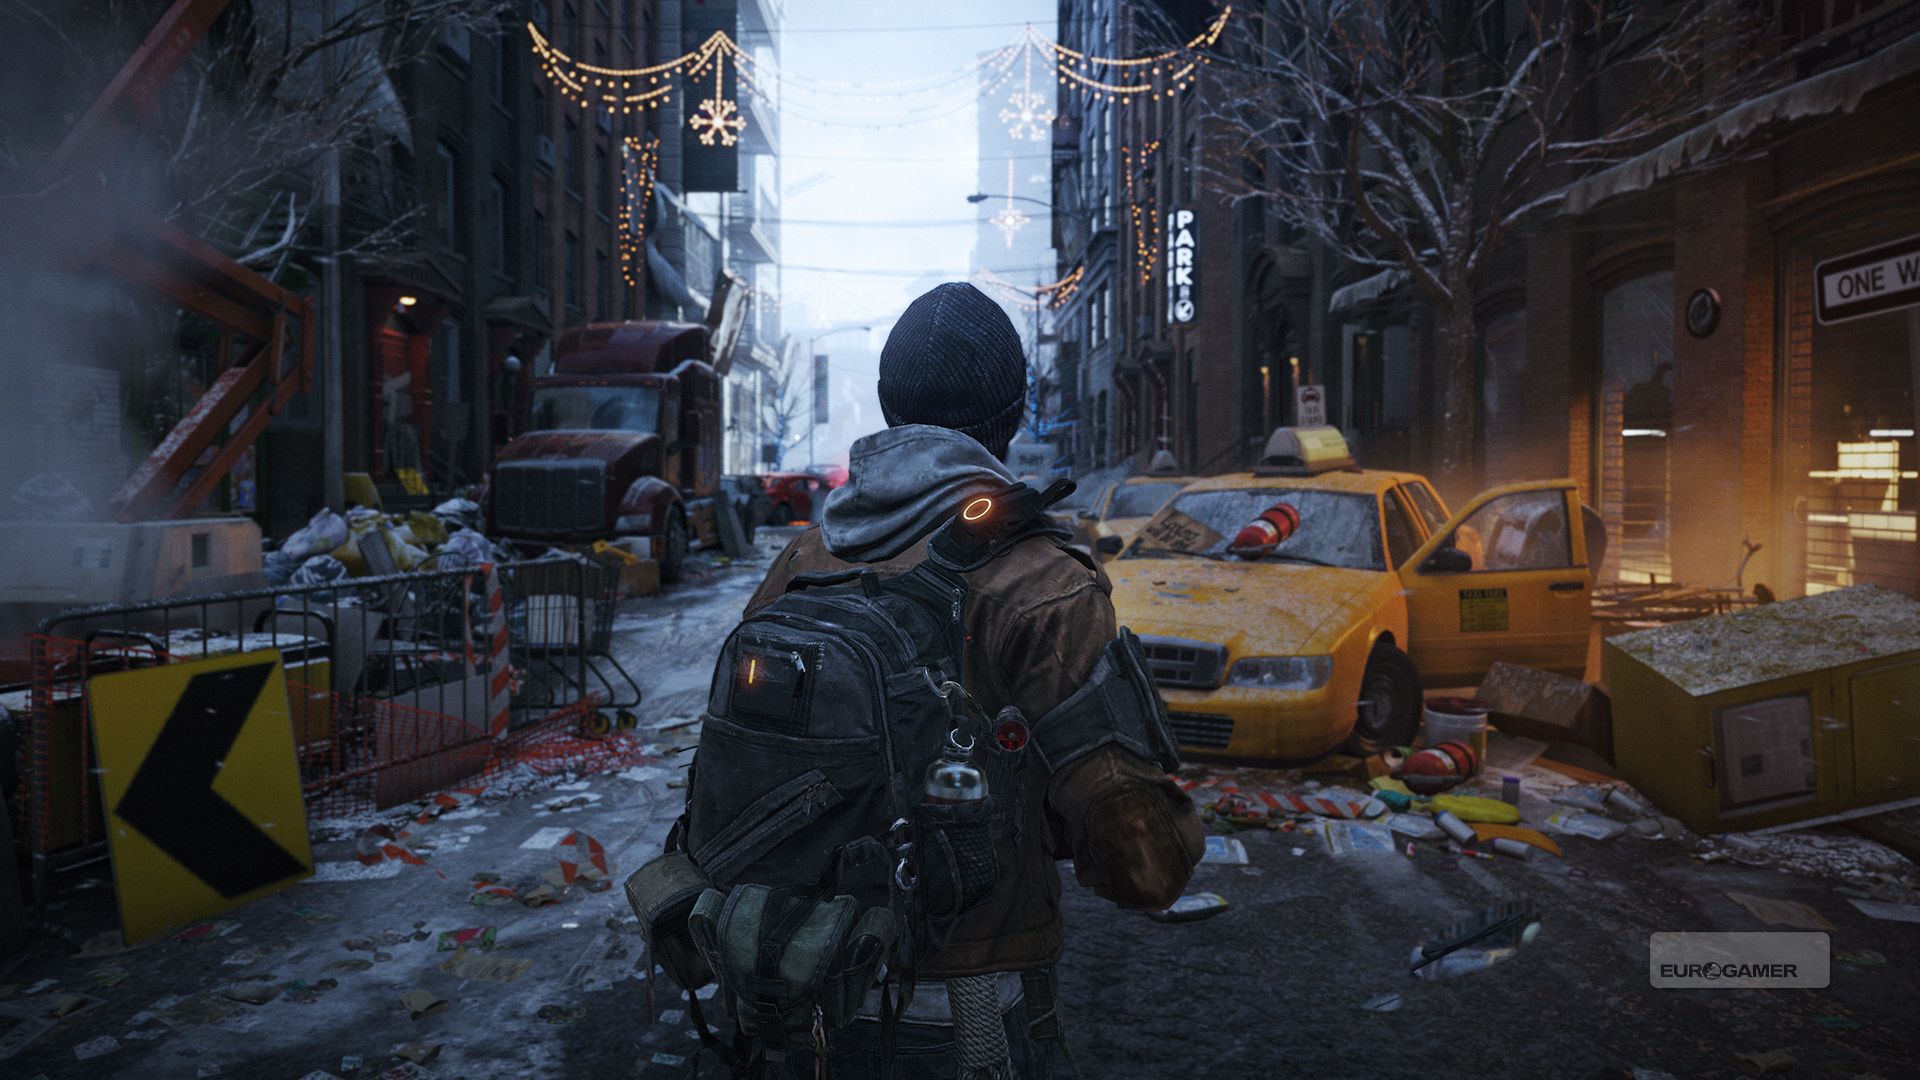 Ubisoft's Next Gen The Division Confirmed For PC Grade Open World RPG Experience